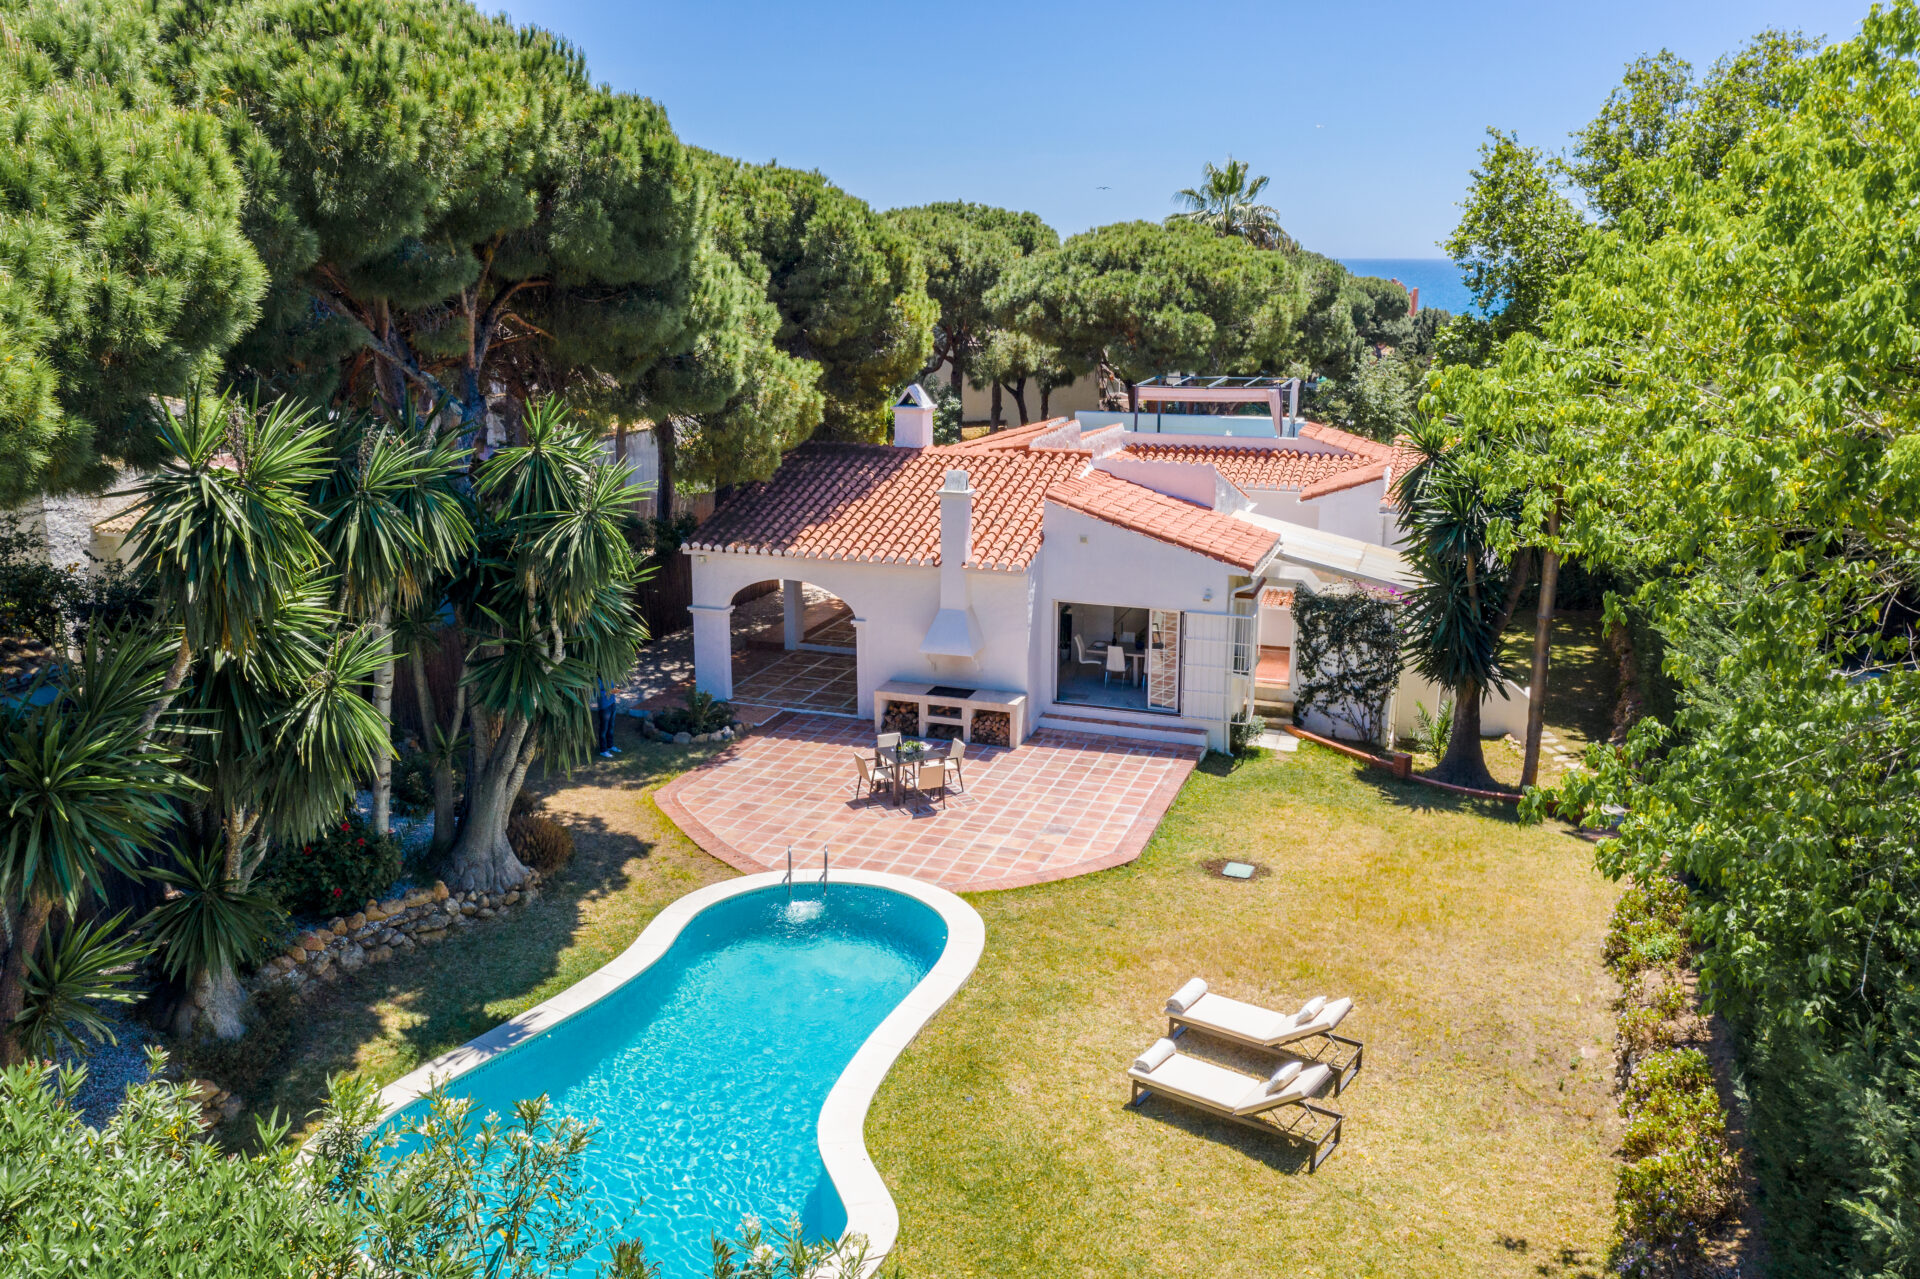 Charming villa in Calahonda 300 meters from the beach.